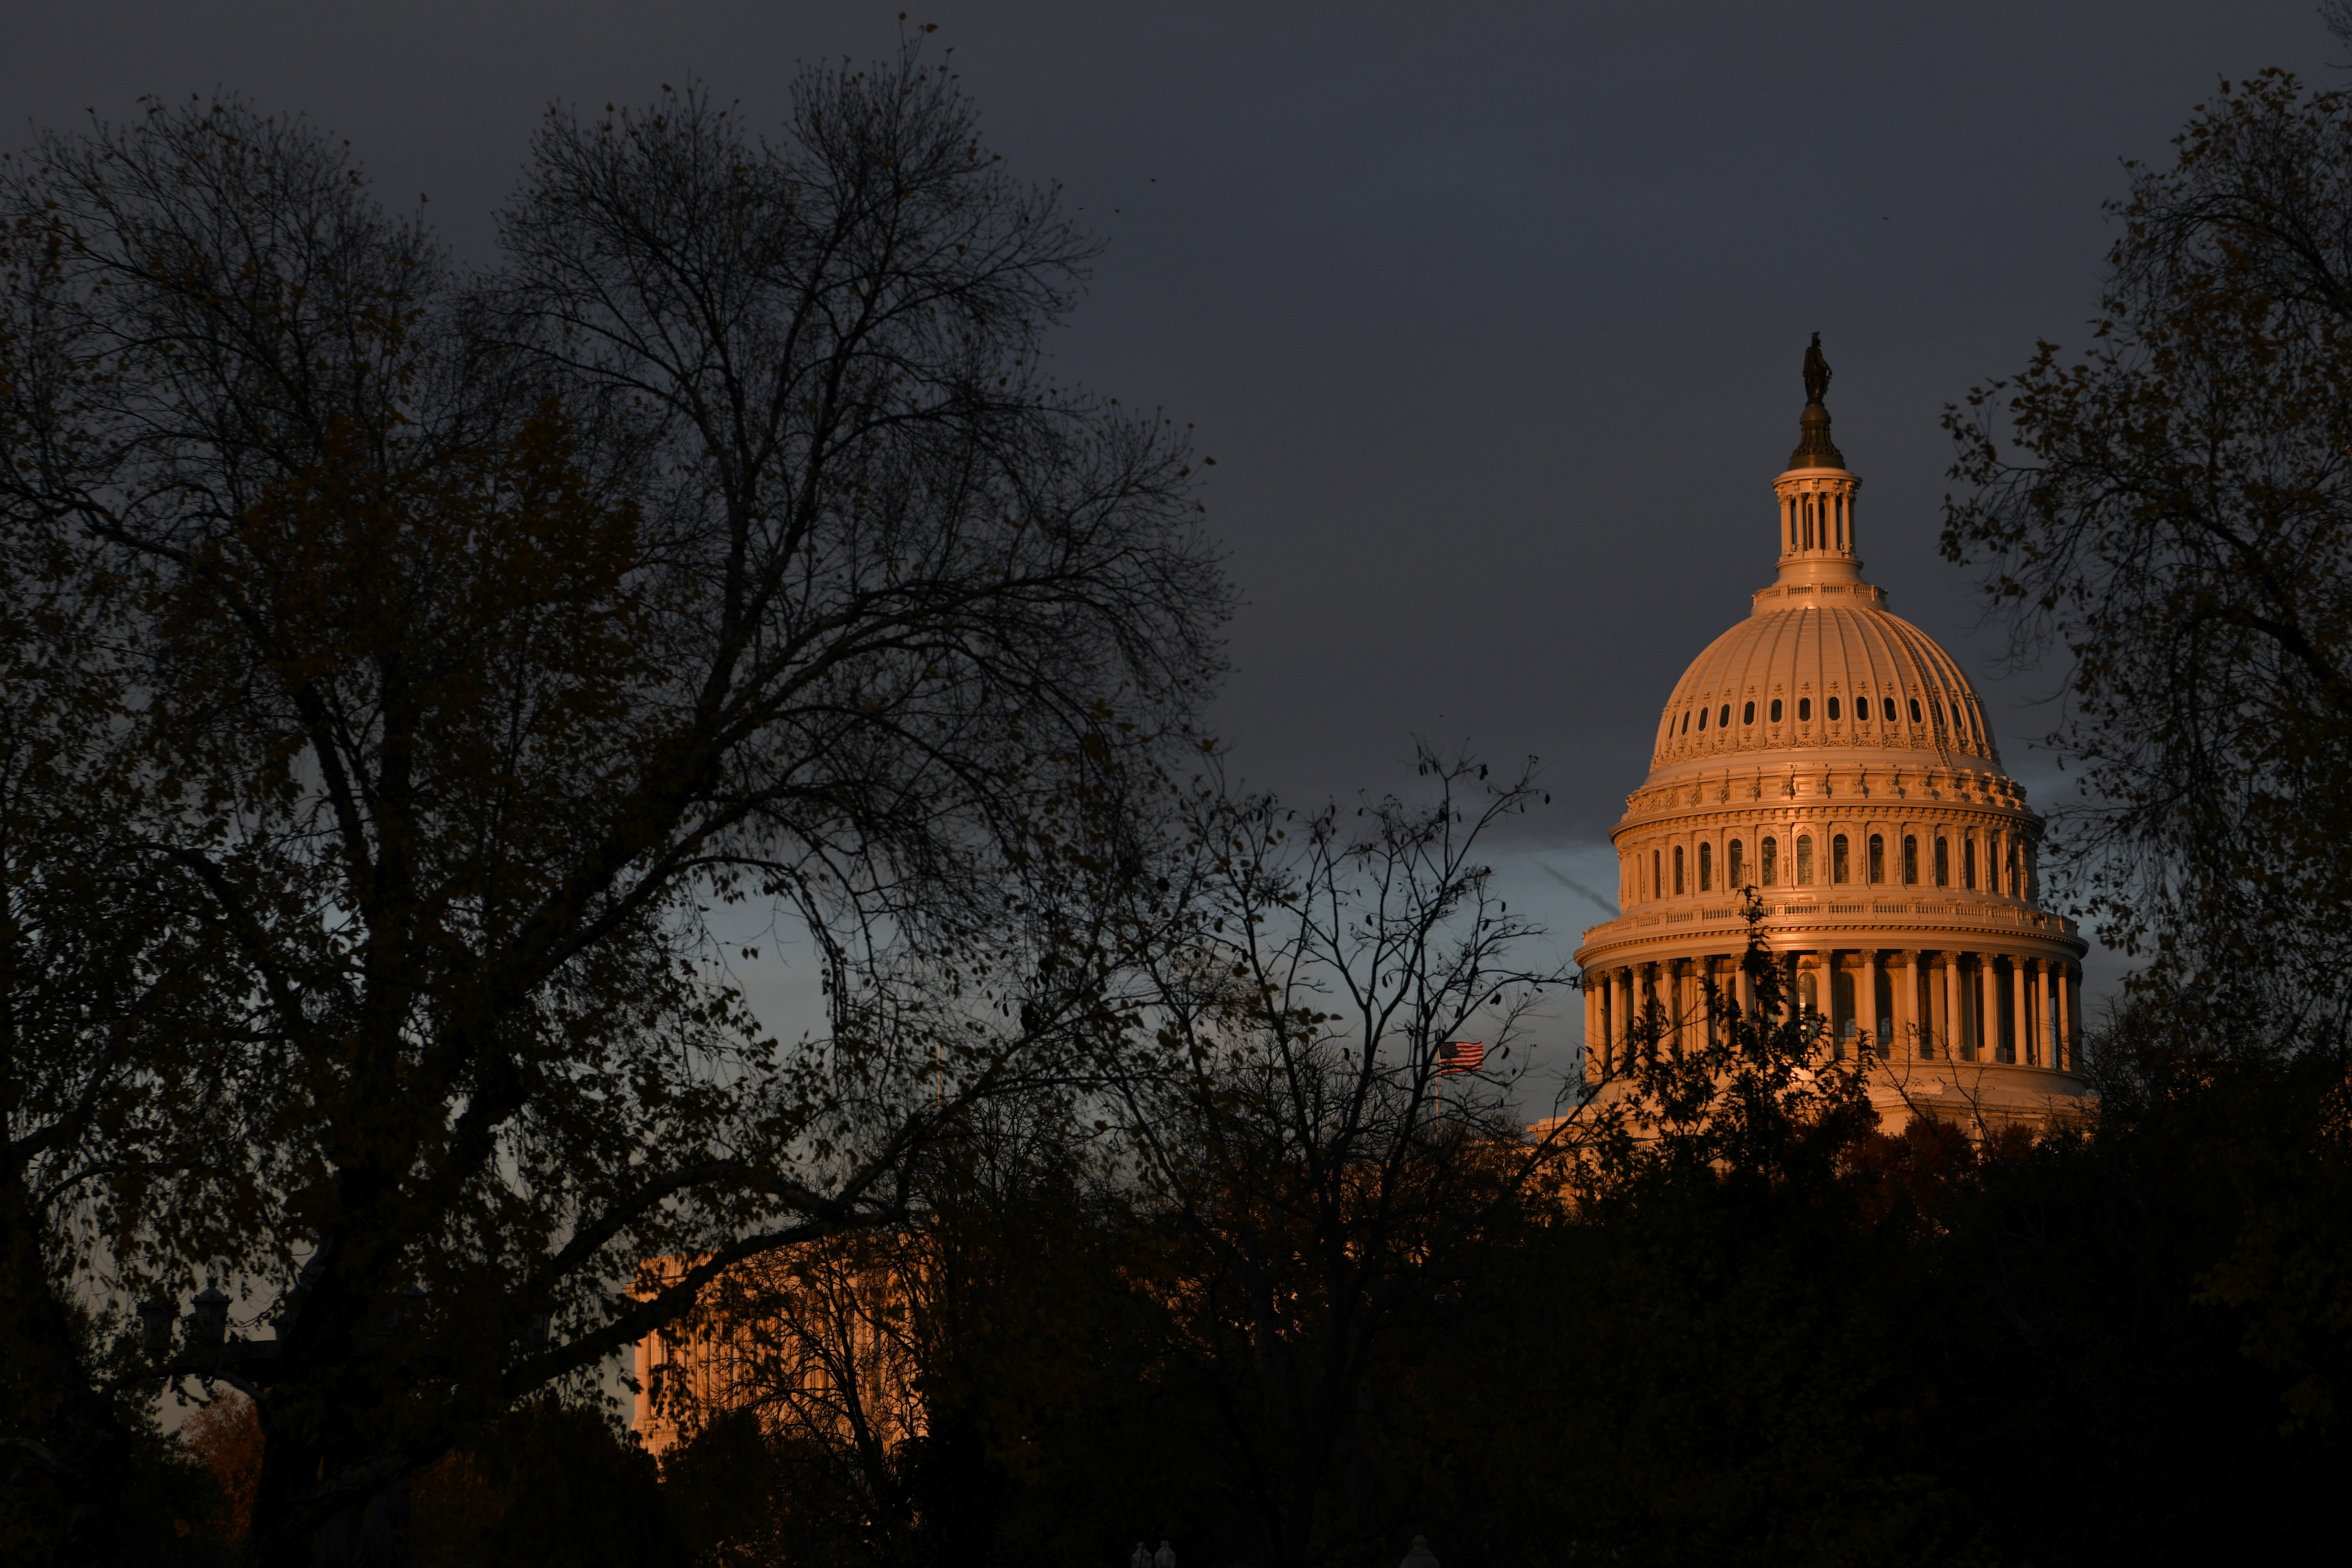 The U.S. Capitol building is pictured at sunset on Capitol Hill in Washington